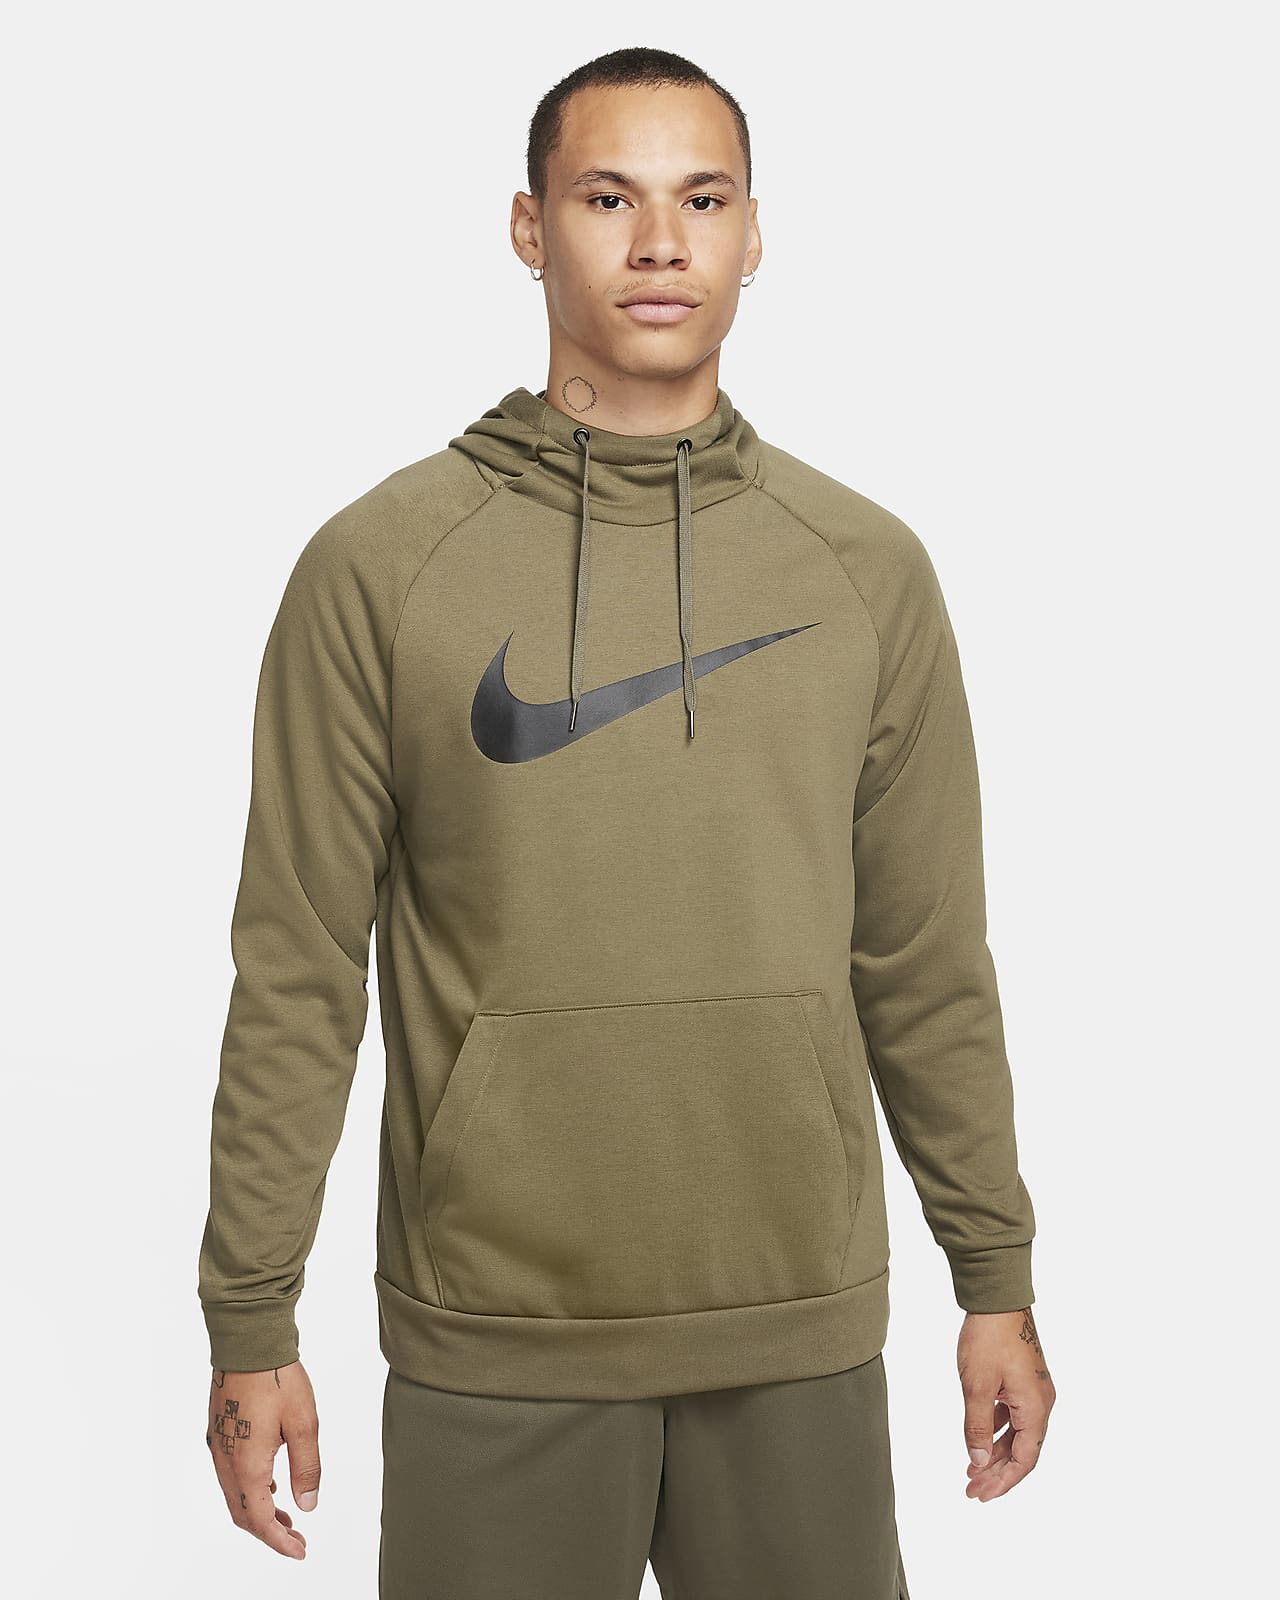 https://static.nike.com/a/images/t_PDP_1280_v1/f_auto,q_auto:eco/17f2e0dd-3e27-4bd5-8e08-341184144b6a/dry-graphic-dri-fit-hooded-fitness-pullover-hoodie-cSz394.png